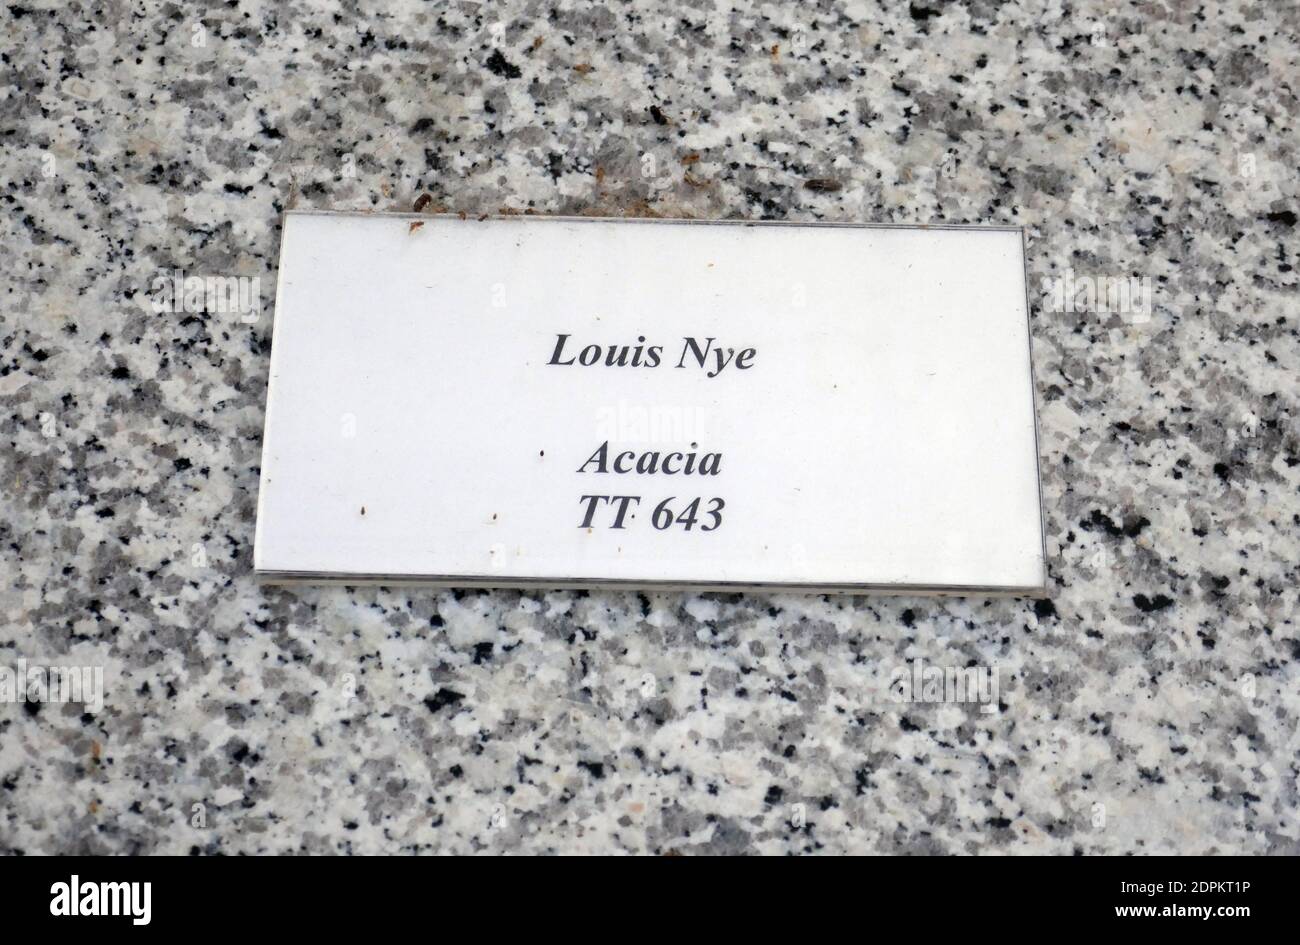 Culver City, California, USA 18th December 2020 A general view of atmosphere of actor Louis Nye's Grave at Hillside Memorial Park on December 18, 2020 in Culver City, California, USA. Photo by Barry King/Alamy Stock Photo Stock Photo